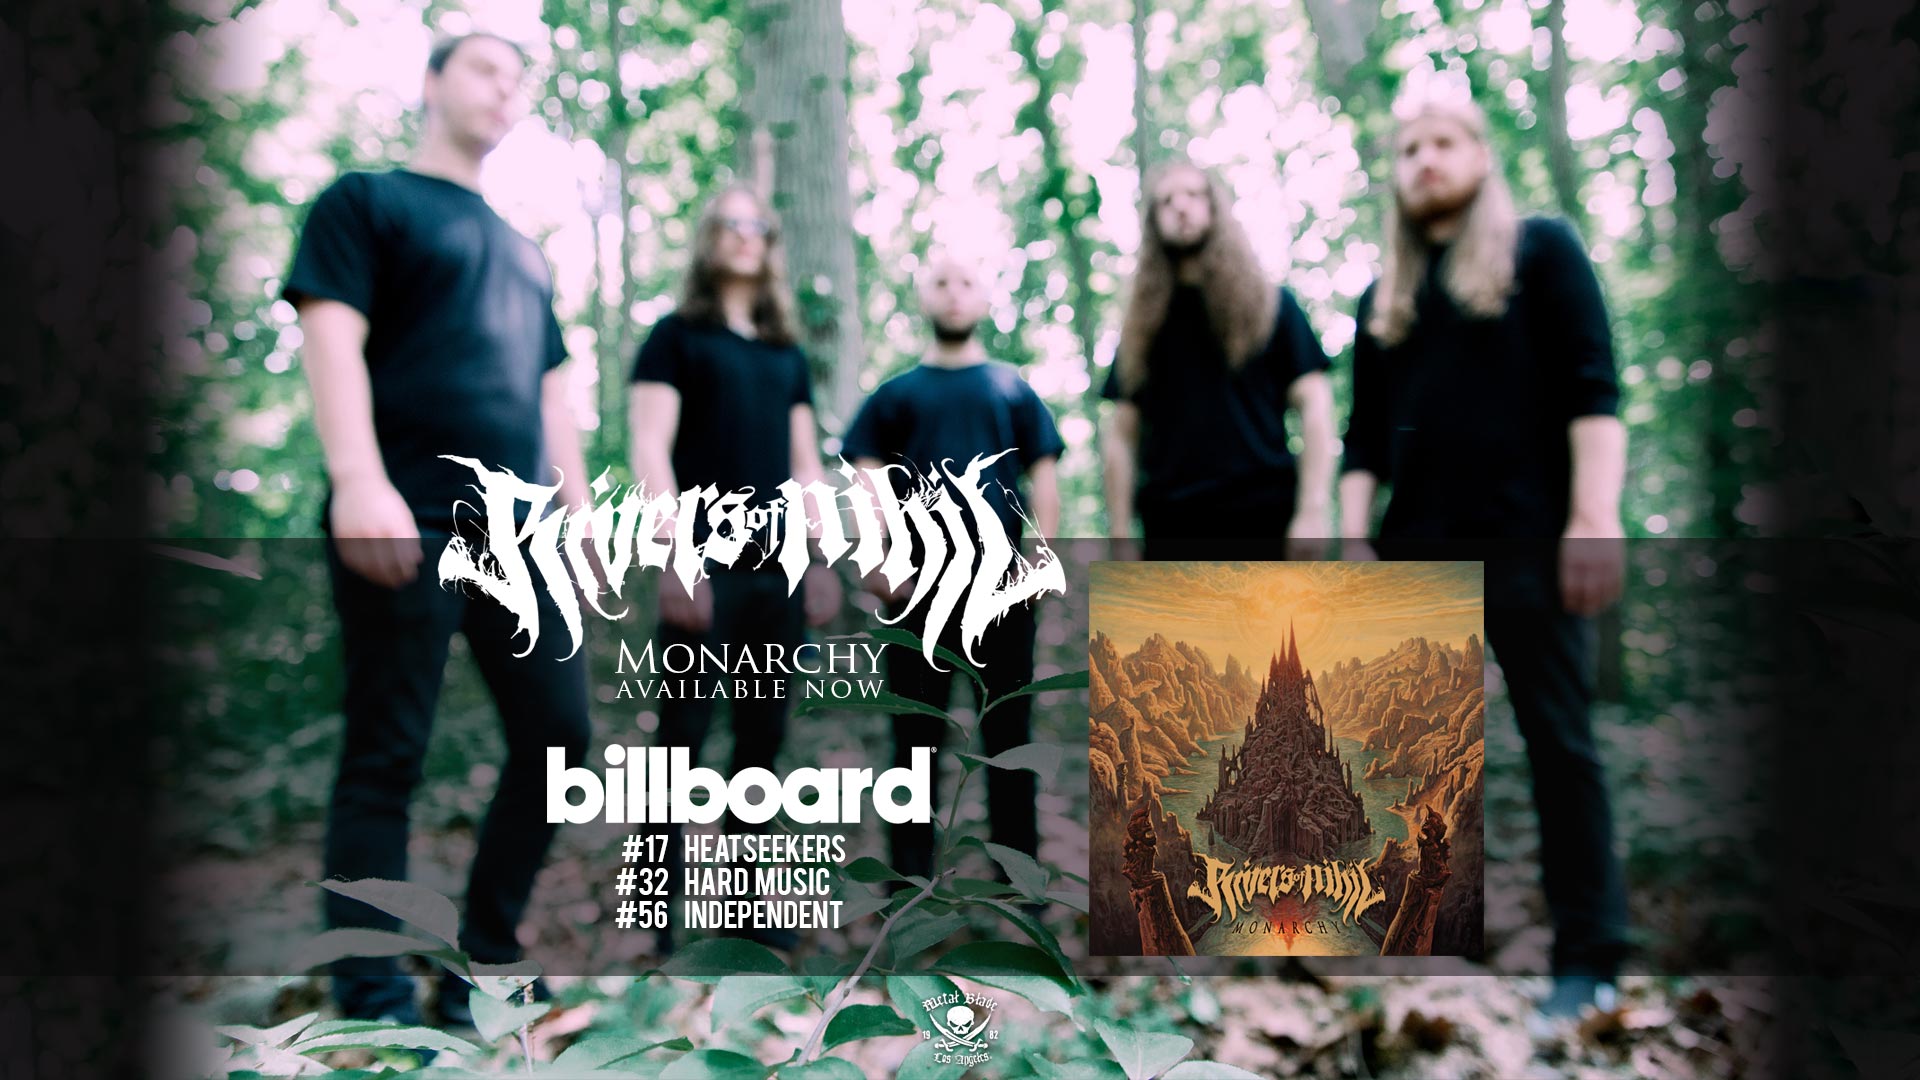 RIVERS OF NIHIL Enter The Billboard Charts With Monarchy! Announce North American Tour Dates With Hate Eternal